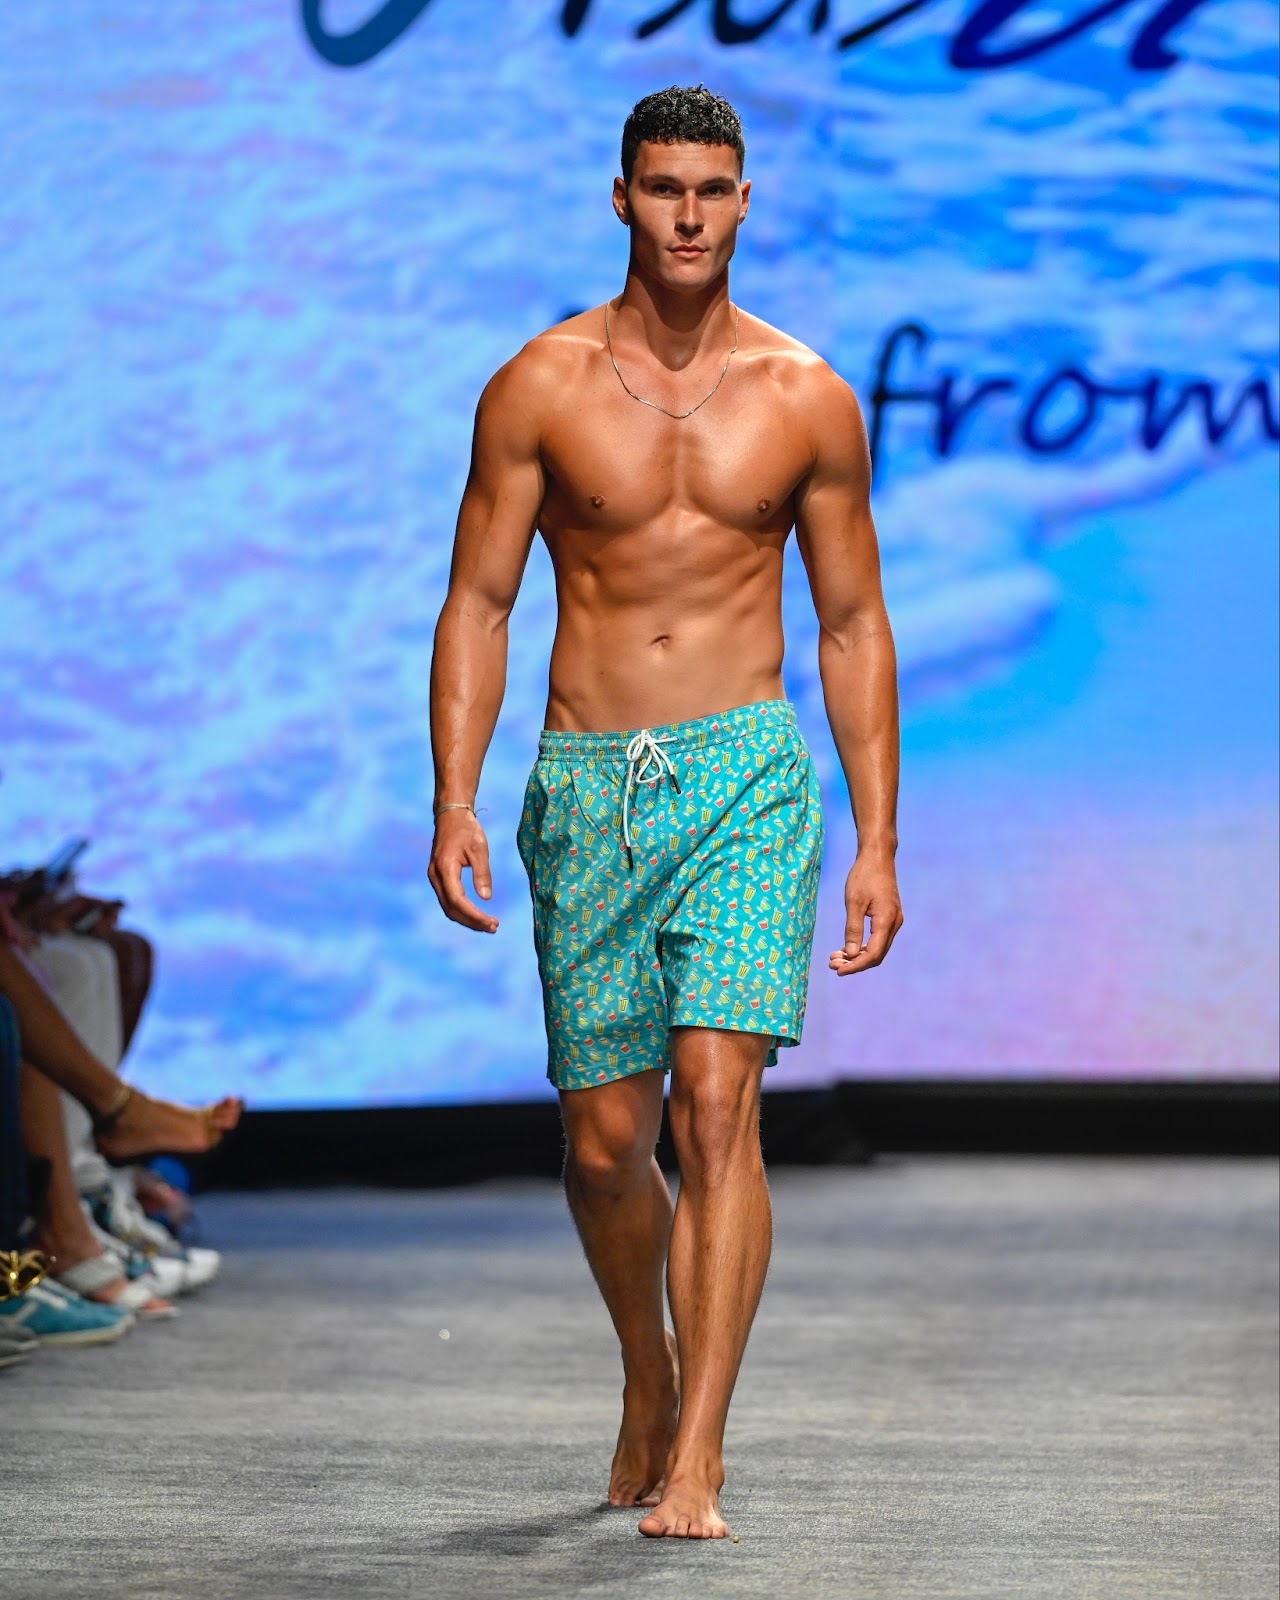 Black tape and sparkles: Miami Swim Week attempts to distract amid  diversity criticism